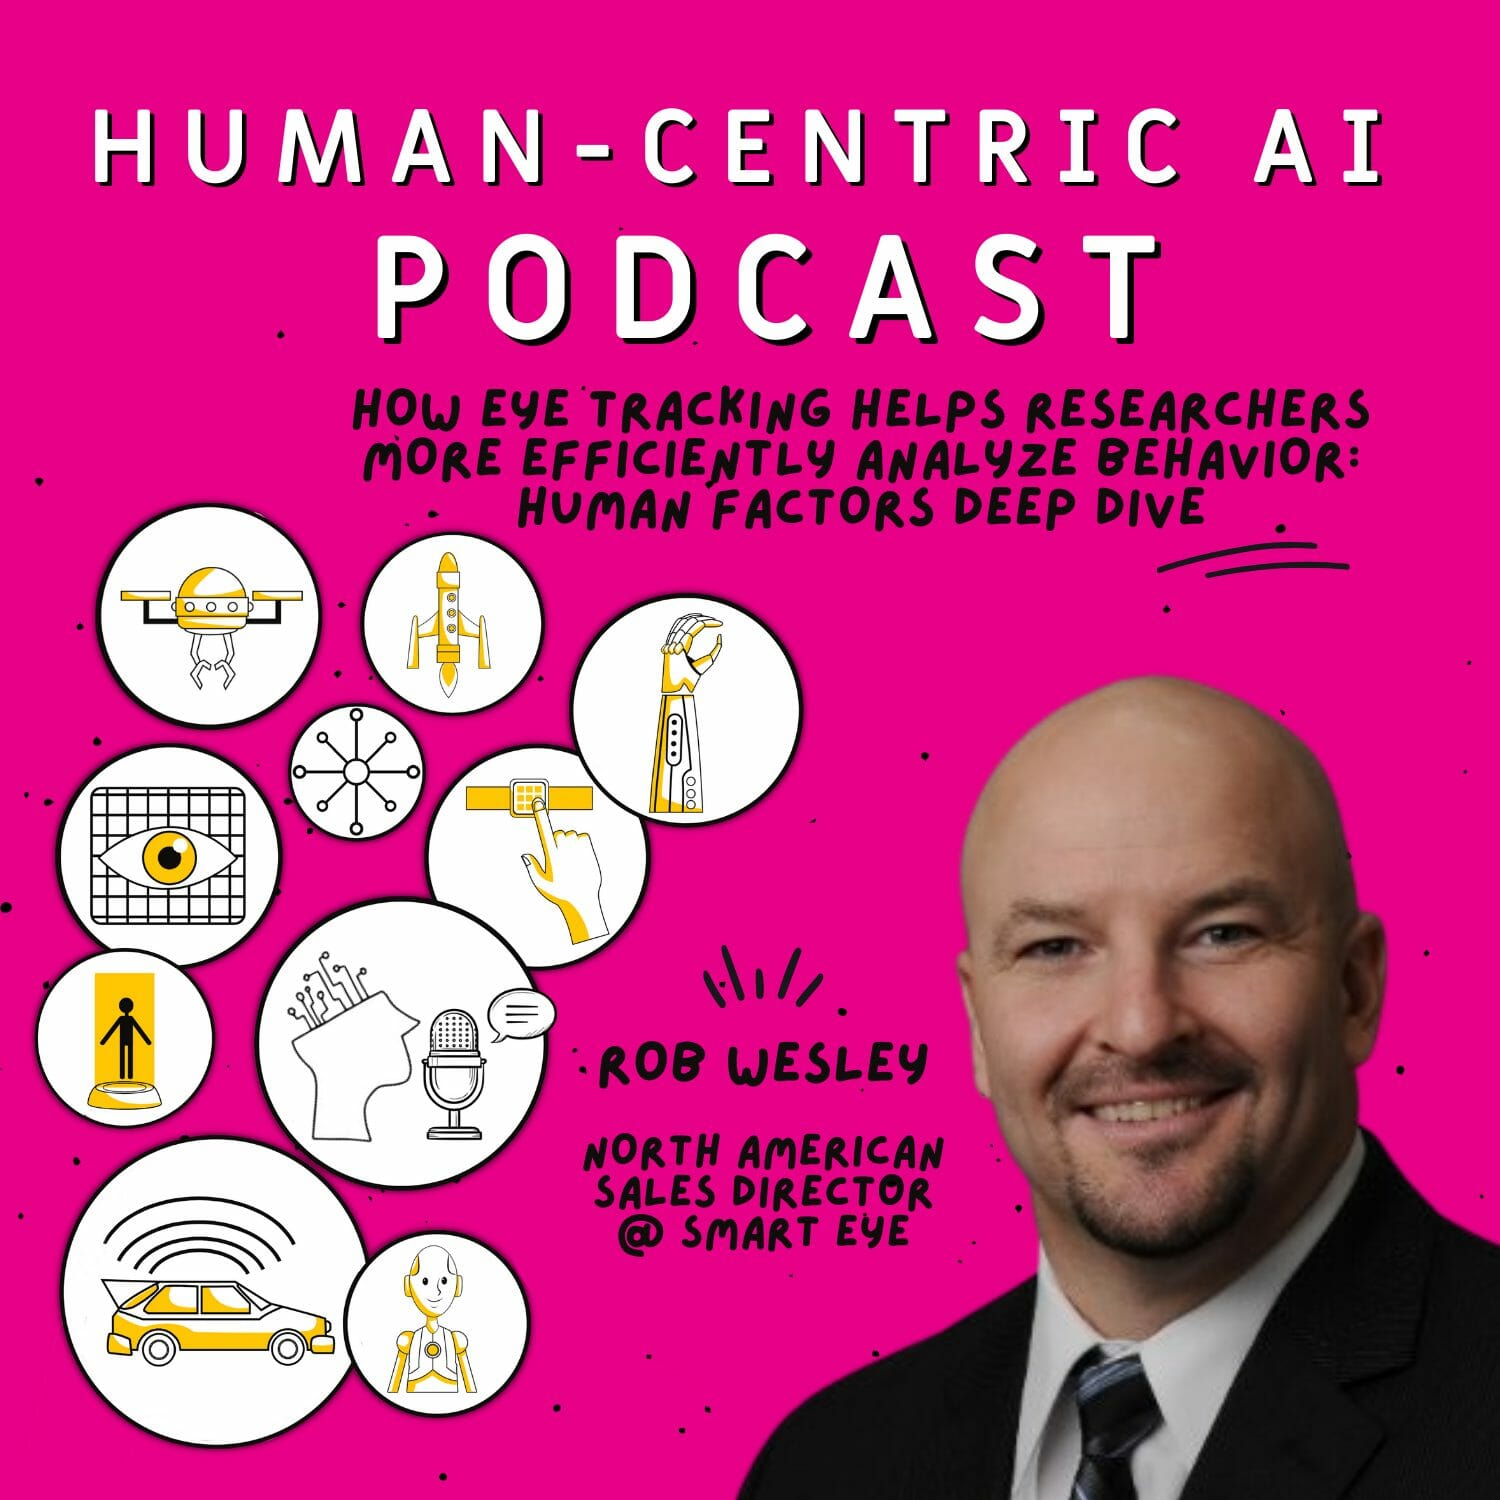 smarteye-human-centric-ai-podcast-how-eye-tracking-helps-researchers-more-efficiently-analyze-behavior-human-factors-deep-dive